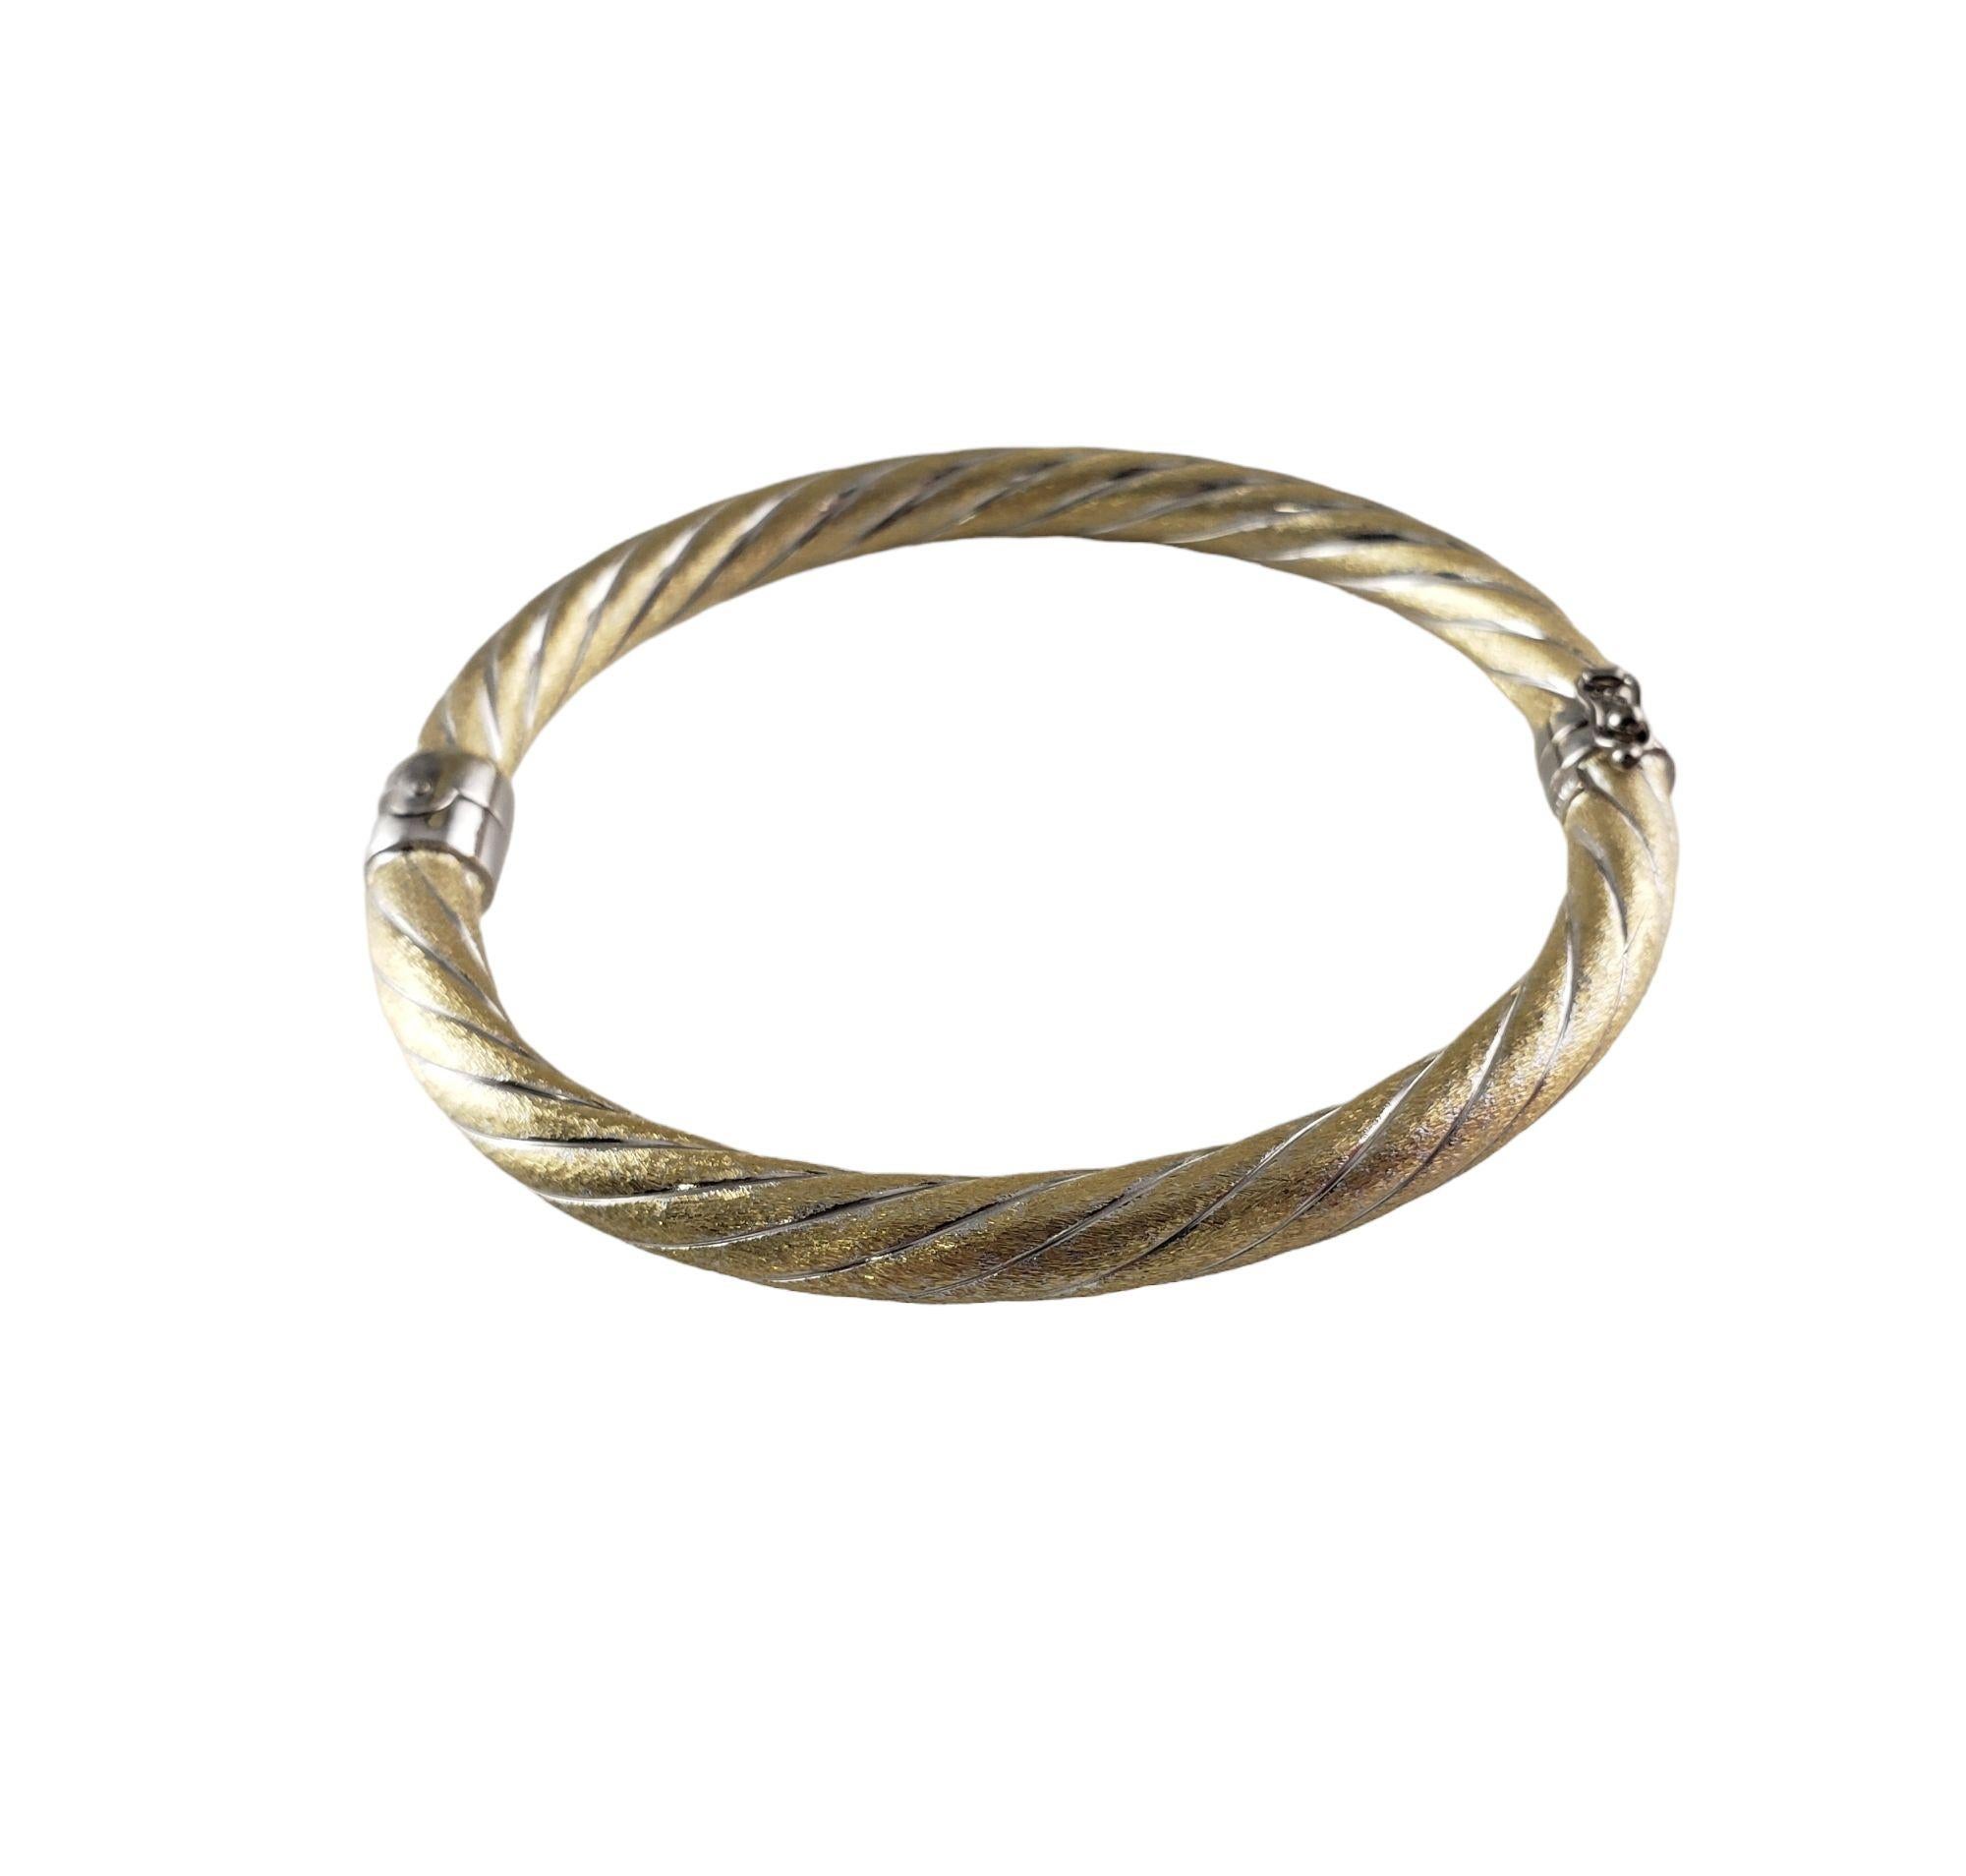 Vintage 14 Karat Yellow Gold and White Bangle Bracelet-

This elegant hinged bangle bracelet is crafted in meticulously detailed 14K yellow and white gold. Width: 6 mm.

Size: 7 inches

Weight: 10.8 gr./ 6.9 dwt.

Stamped: 14K

Very good condition,